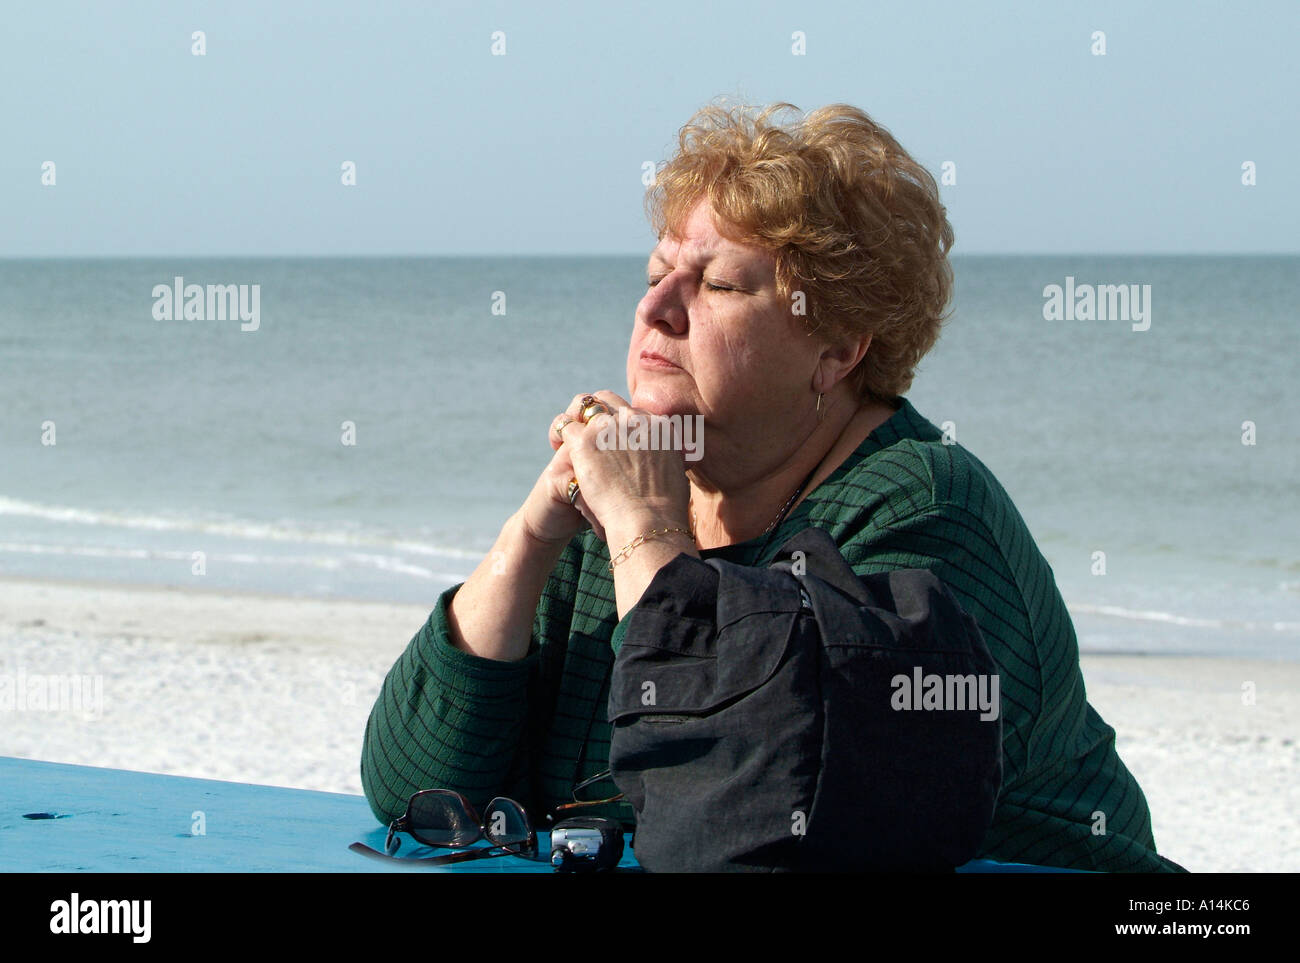 Visitors to St Pete Beach and Pasa Grille Florida engage in exercise relaxation and hobbies while vacationing Stock Photo